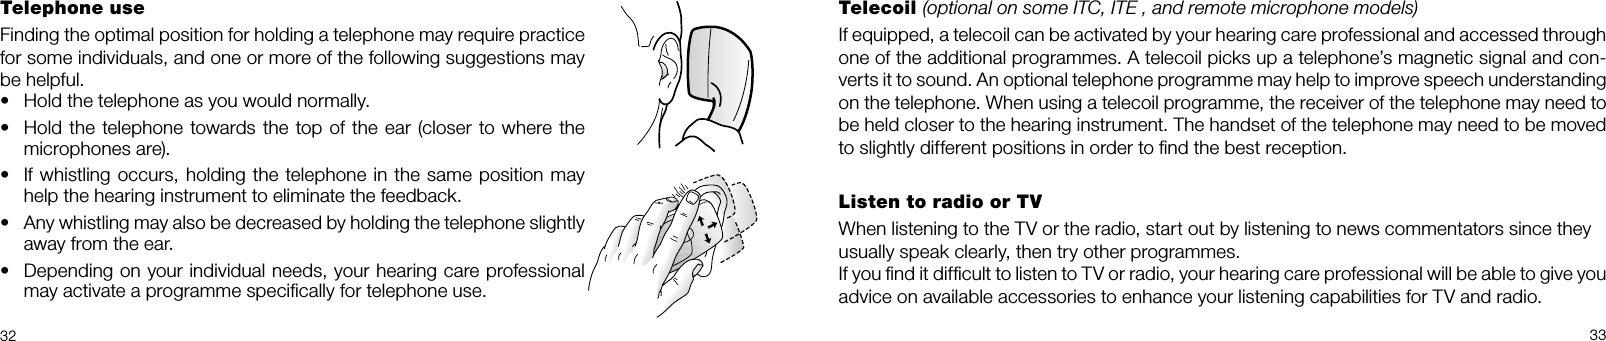 32 33Telephone useFinding the optimal position for holding a tele phone may require practice for some individuals, and one or more of the following suggestions may be helpful.• Hold the telephone as you would normally.• Hold the telephone towards the top of the ear (closer to where the microphones are).• If whistling occurs, holding the tele phone in the same position may help the hearing instrument to eliminate the feedback.• Any whistling may also be decreased by holding the telephone slightly away from the ear.• Depending on your individual needs, your hearing care professional  may activate a programme speciﬁcally for telephone use.Telecoil (optional on some ITC, ITE , and remote microphone models)If equipped, a telecoil can be activated by your hearing care professional and accessed through one of the additional programmes. A telecoil picks up a telephone’s magnetic signal and con-verts it to sound. An optional telephone programme may help to improve speech understanding on the telephone. When using a telecoil programme, the receiver of the telephone may need to be held closer to the hearing instrument. The handset of the telephone may need to be moved to slightly different positions in order to ﬁnd the best reception. Listen to radio or TVWhen listening to the TV or the radio, start out by listening to news commentators since theyusually speak clearly, then try other programmes.If you ﬁnd it difﬁcult to listen to TV or radio, your hearing care professional will be able to give you advice on available accessories to enhance your listening capabilities for TV and radio.